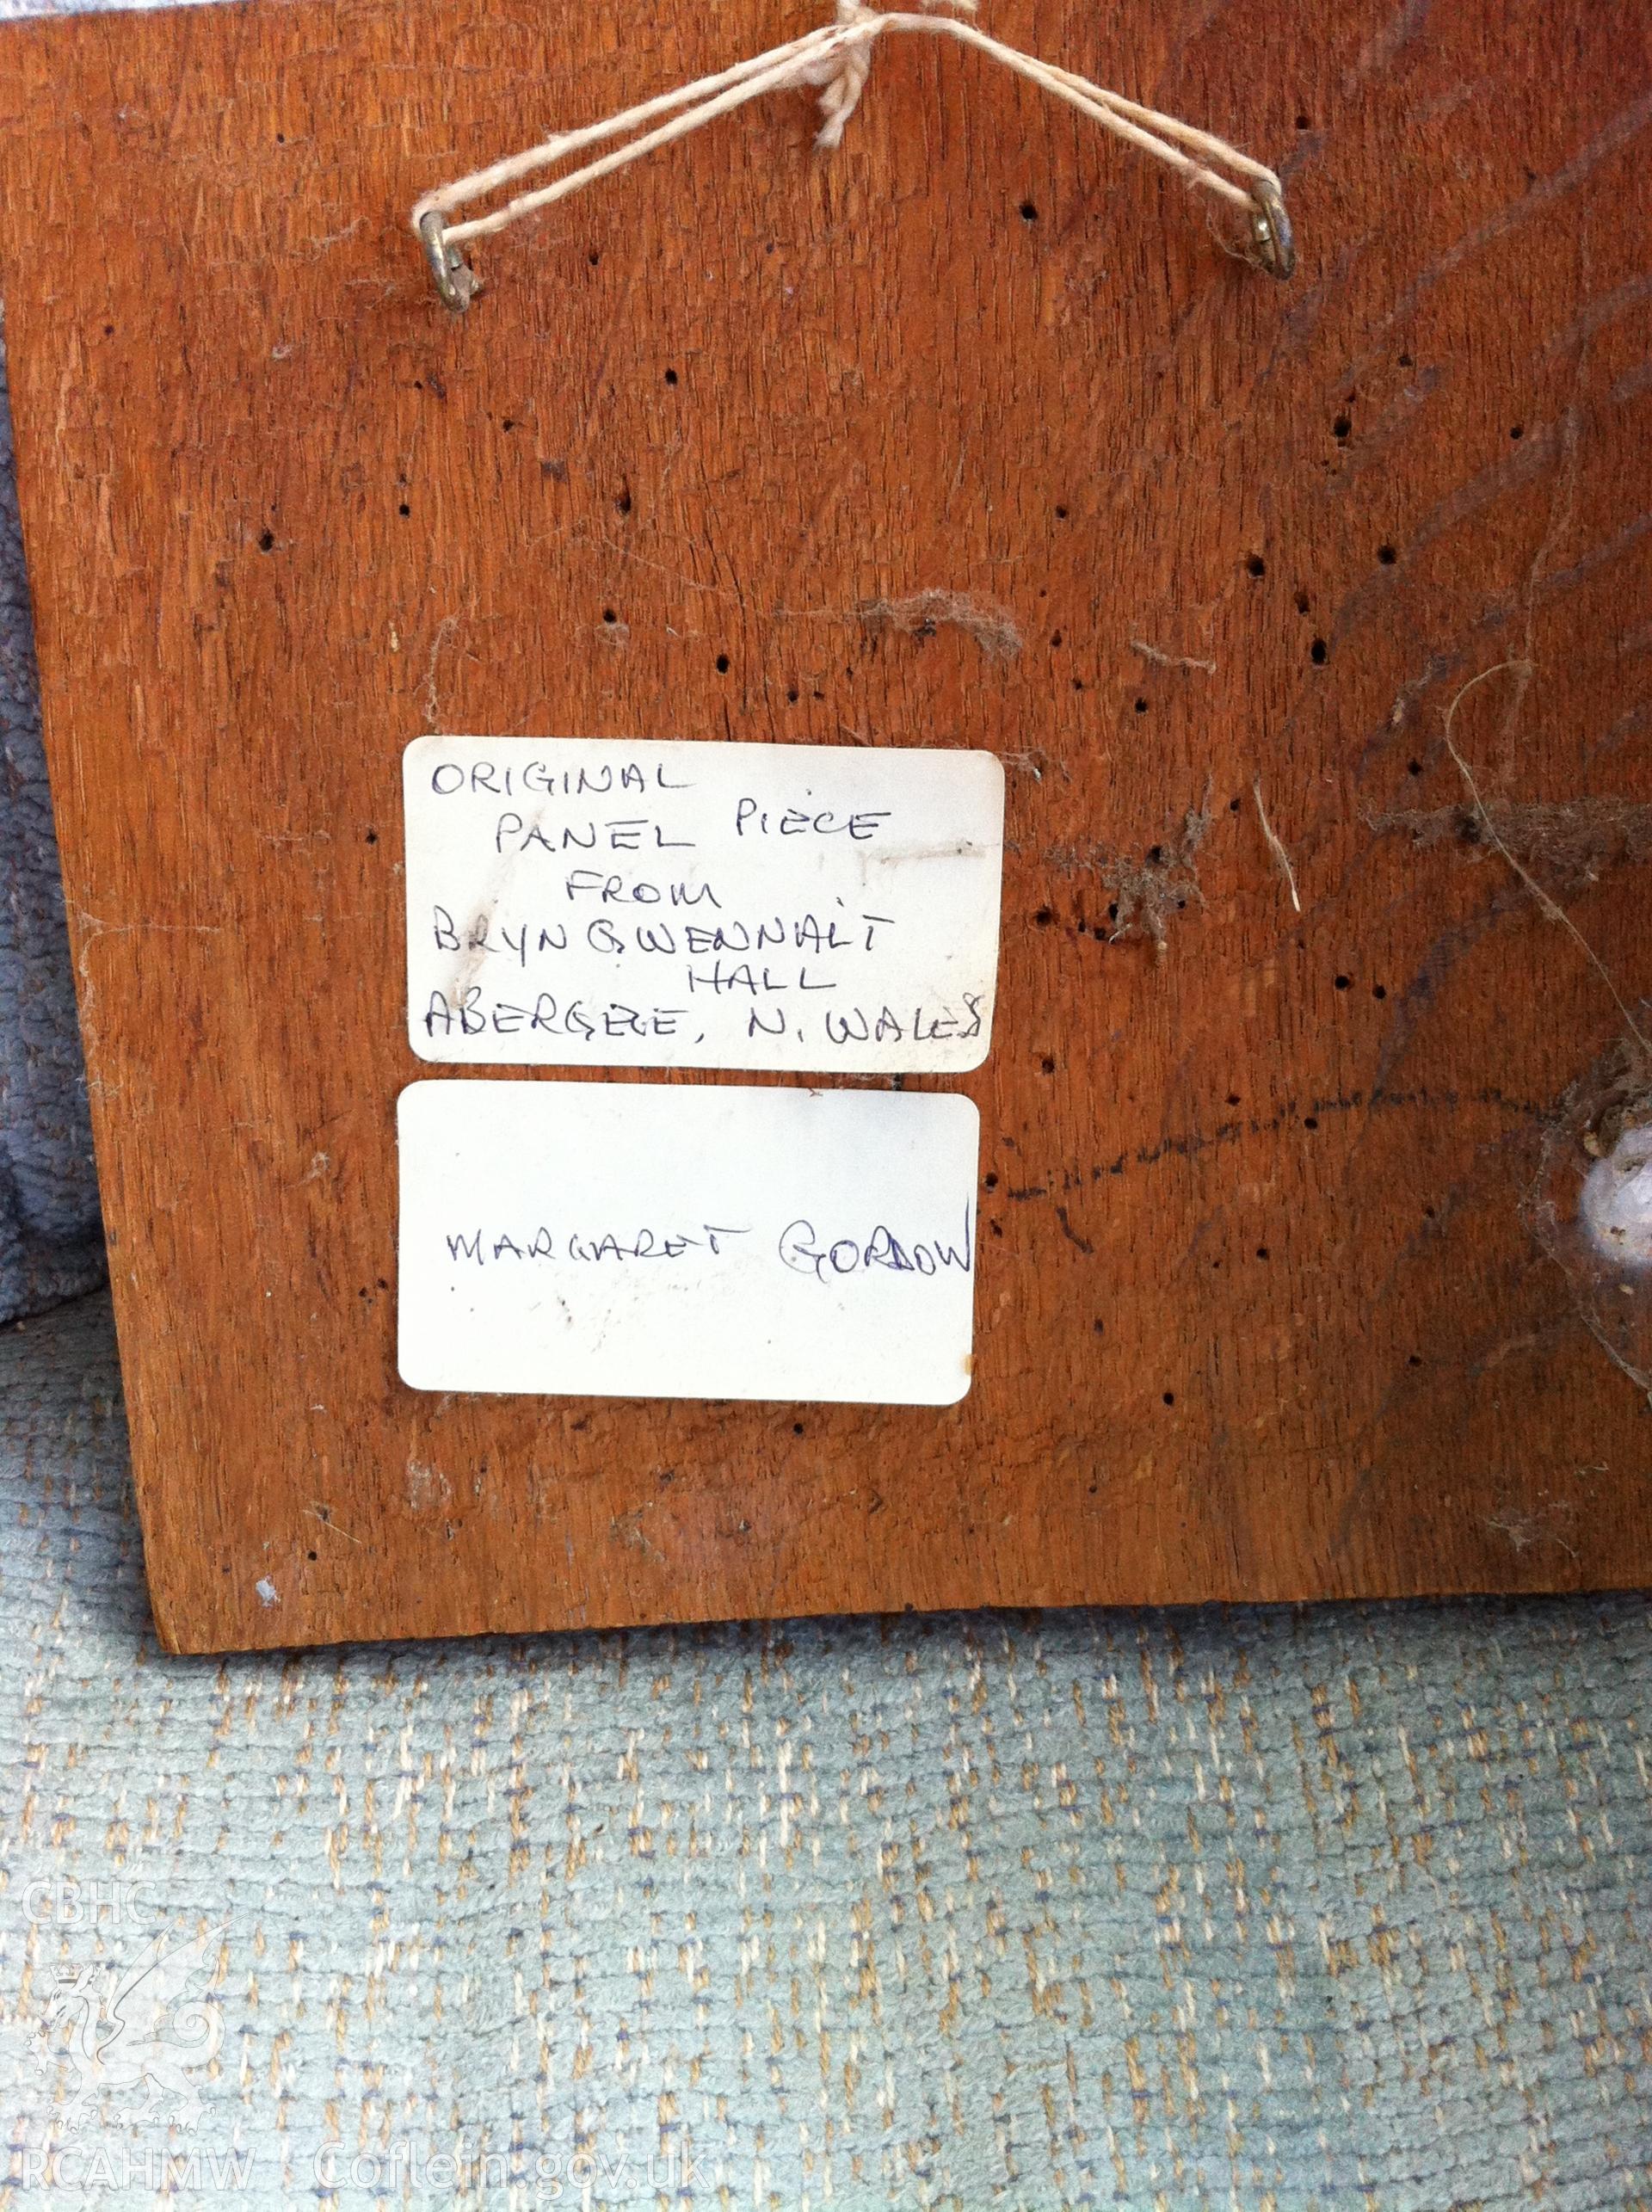 Digital photograph of wooden panel labelled 'original panel piece from Bryngwenallt Hall, Abergele, North Wales. Margaret Gordon.' Photographed in 2017 by Gillian Swan.